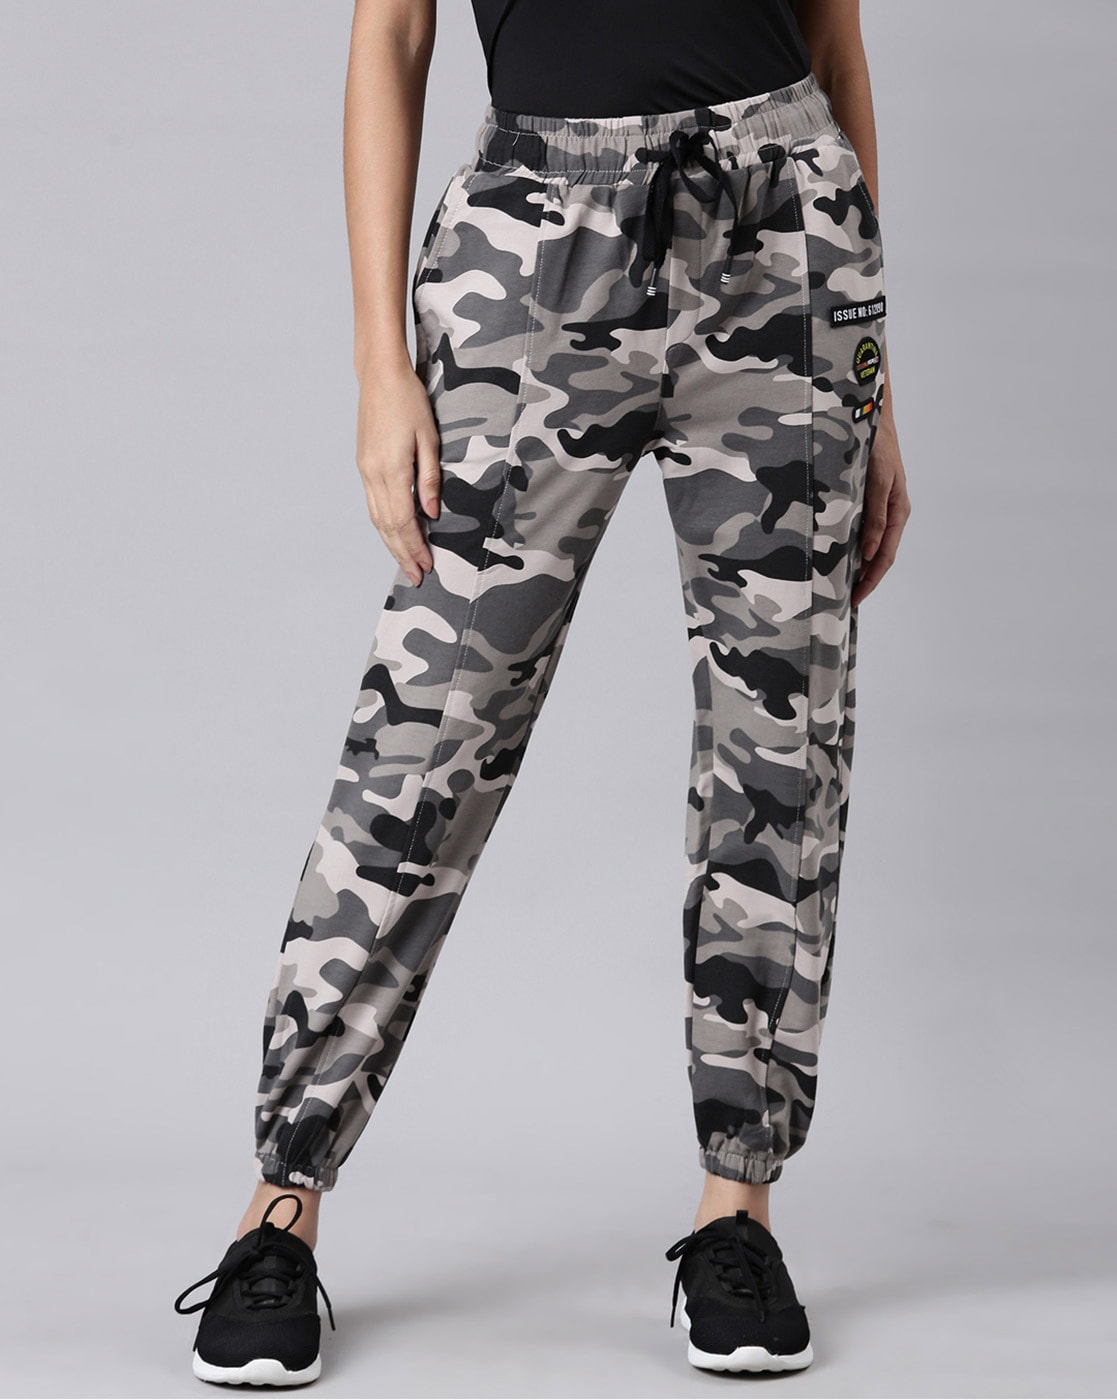 Women's Fashion Camo Cargo Trousers Casual Pants Military Army Combat Camouflage  Jeans High Waist Loose Sports Pants Hose | Wish